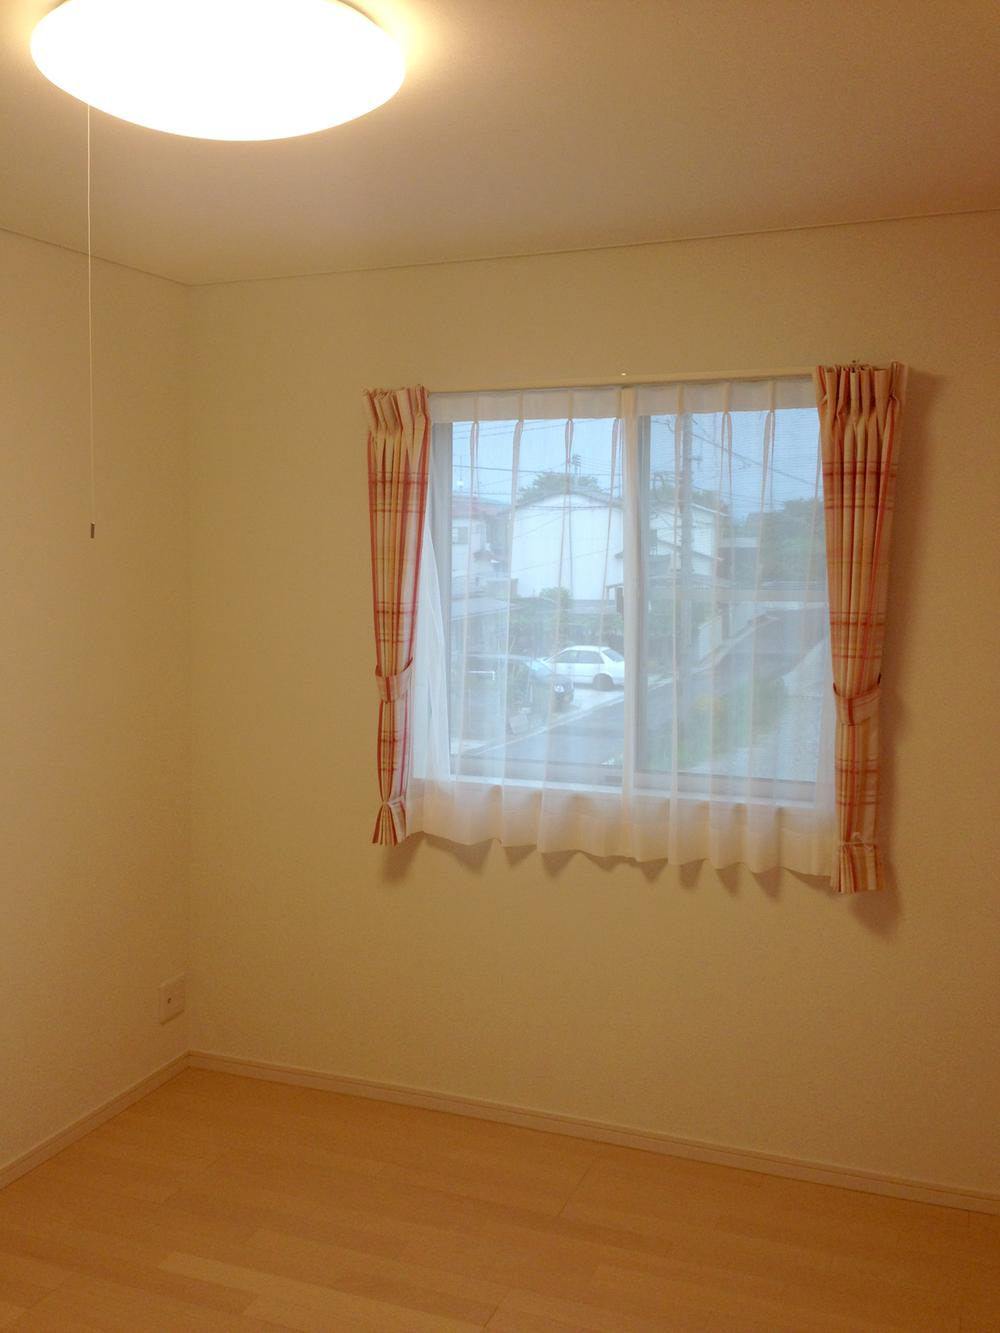 Non-living room. It has been carefully selected to all rooms, illumination ・ With curtain